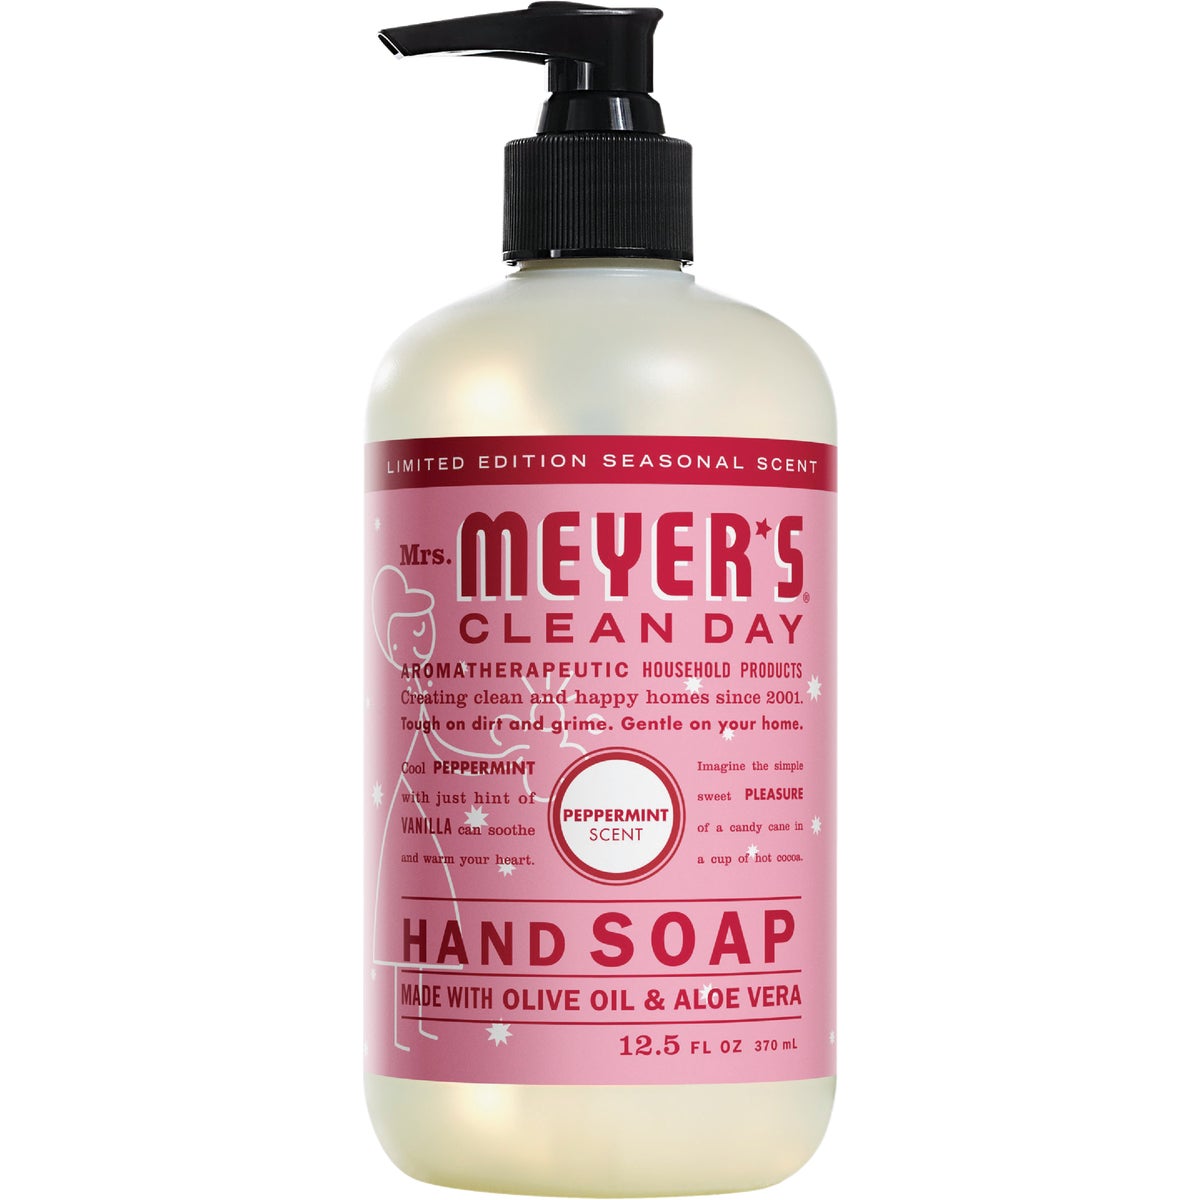 Mrs. Meyer's Clean Day 12.5 Oz. Peppermint Liquid Hand Soap